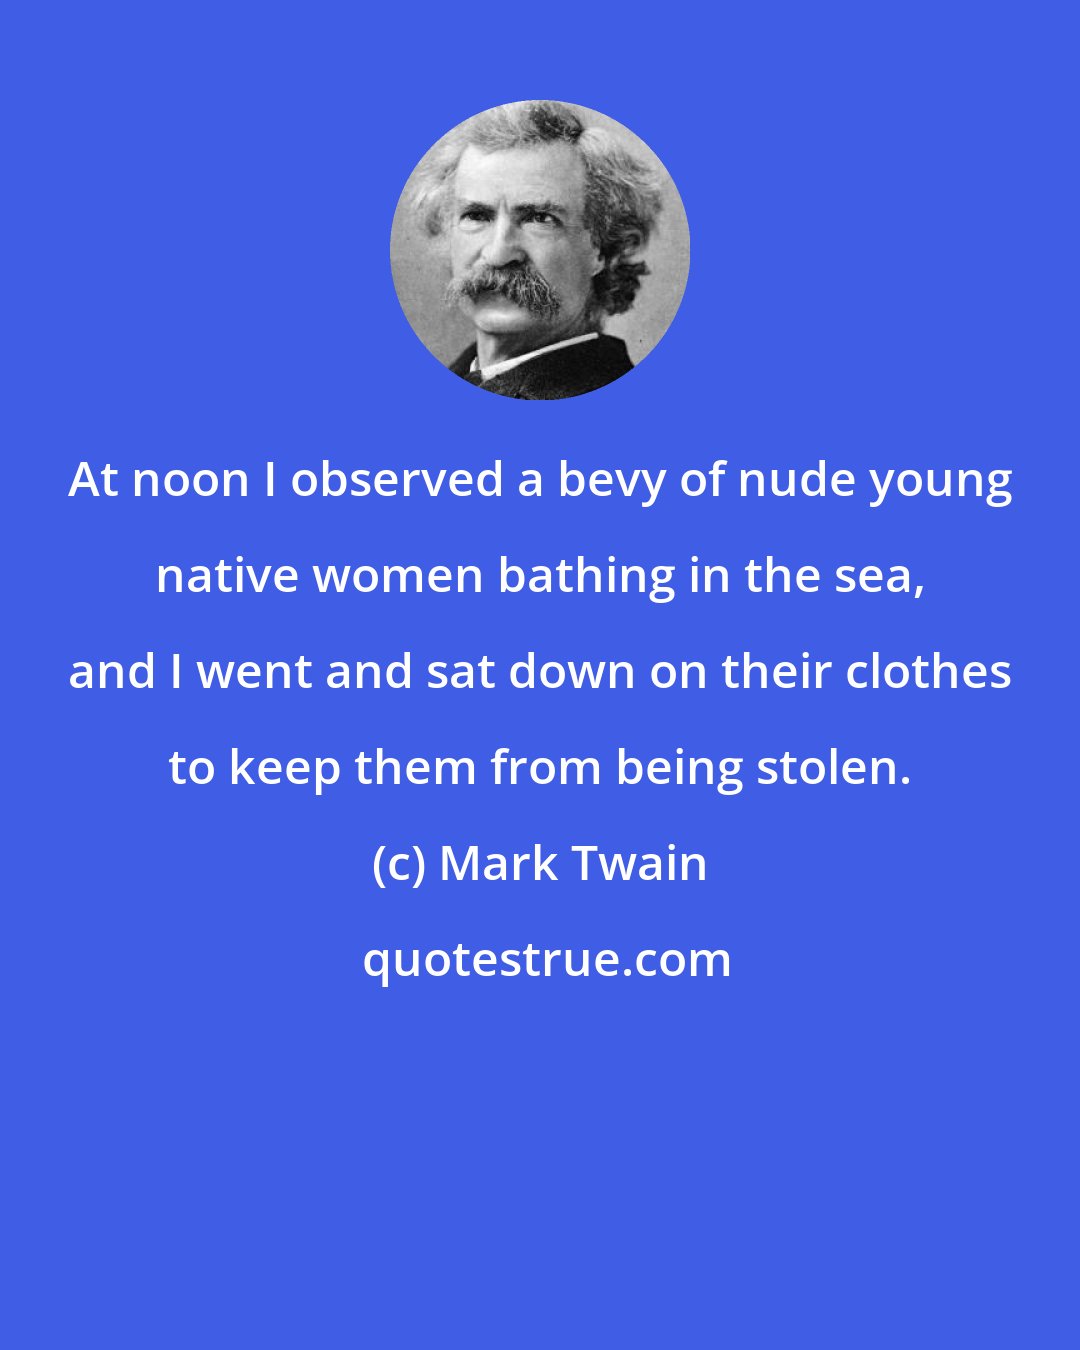 Mark Twain: At noon I observed a bevy of nude young native women bathing in the sea, and I went and sat down on their clothes to keep them from being stolen.